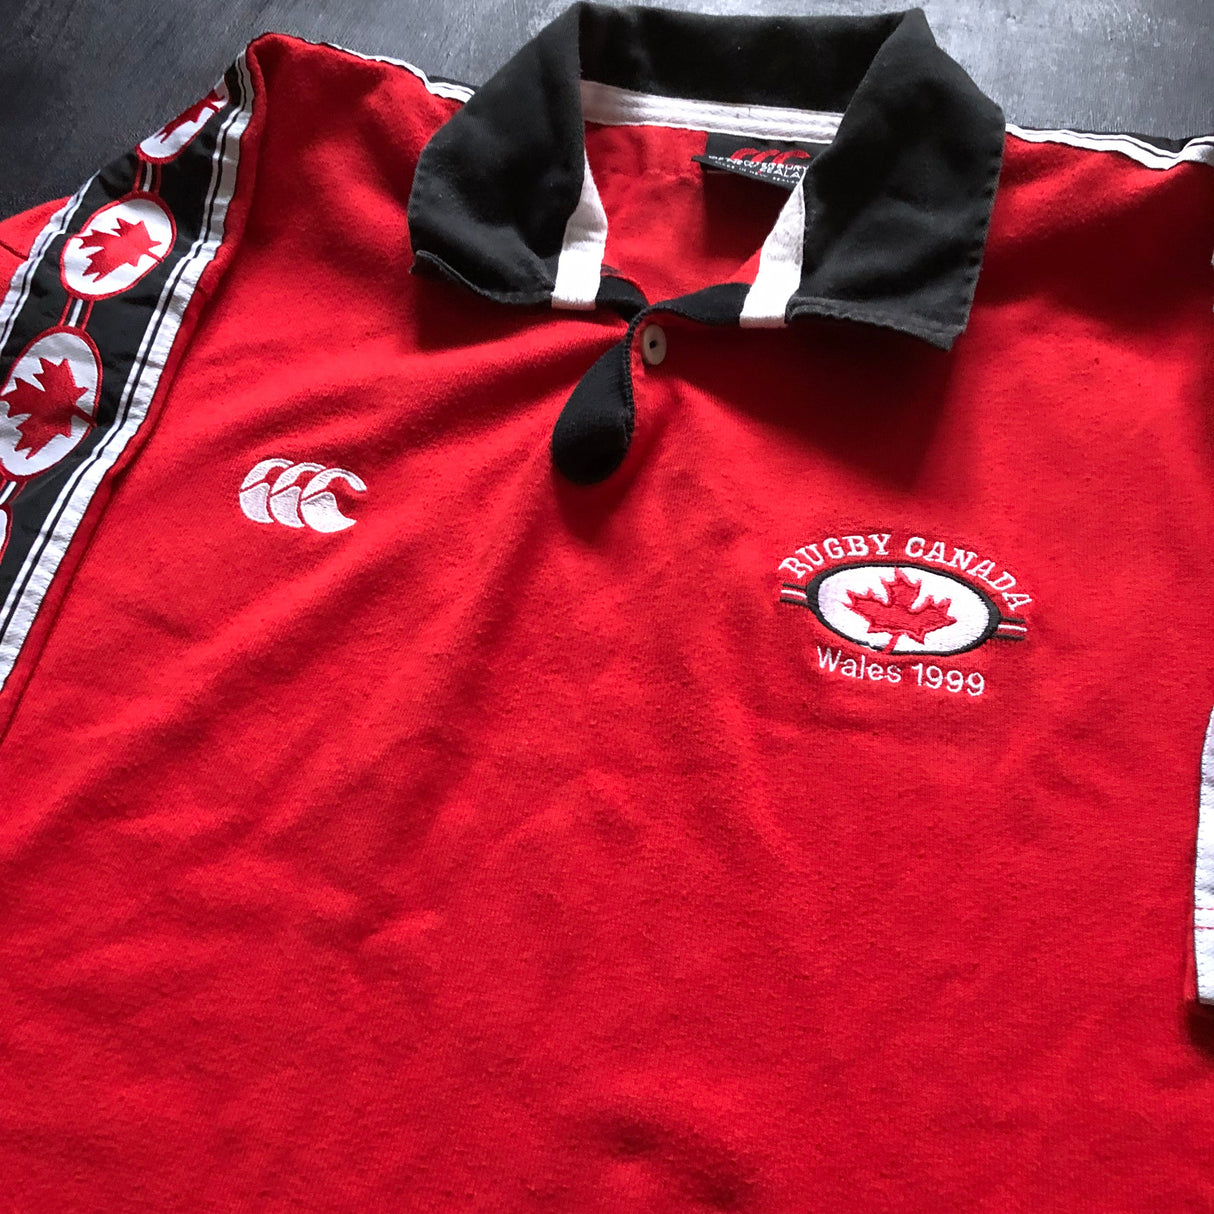 Canada National Rugby Team Jersey 1999 Large Underdog Rugby - The Tier 2 Rugby Shop 